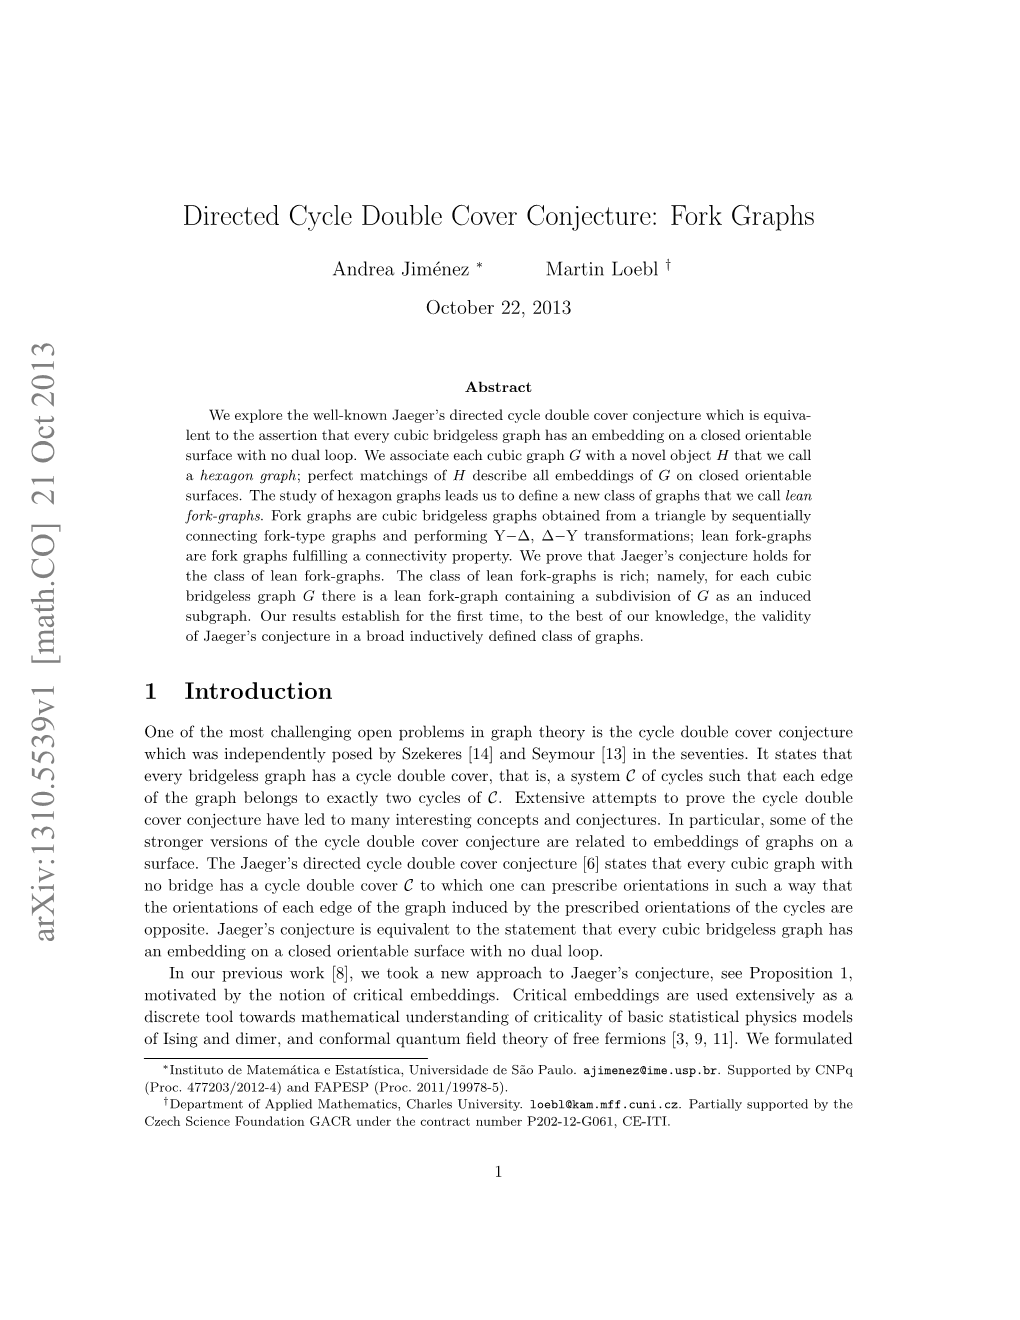 Directed Cycle Double Cover Conjecture: Fork Graphs